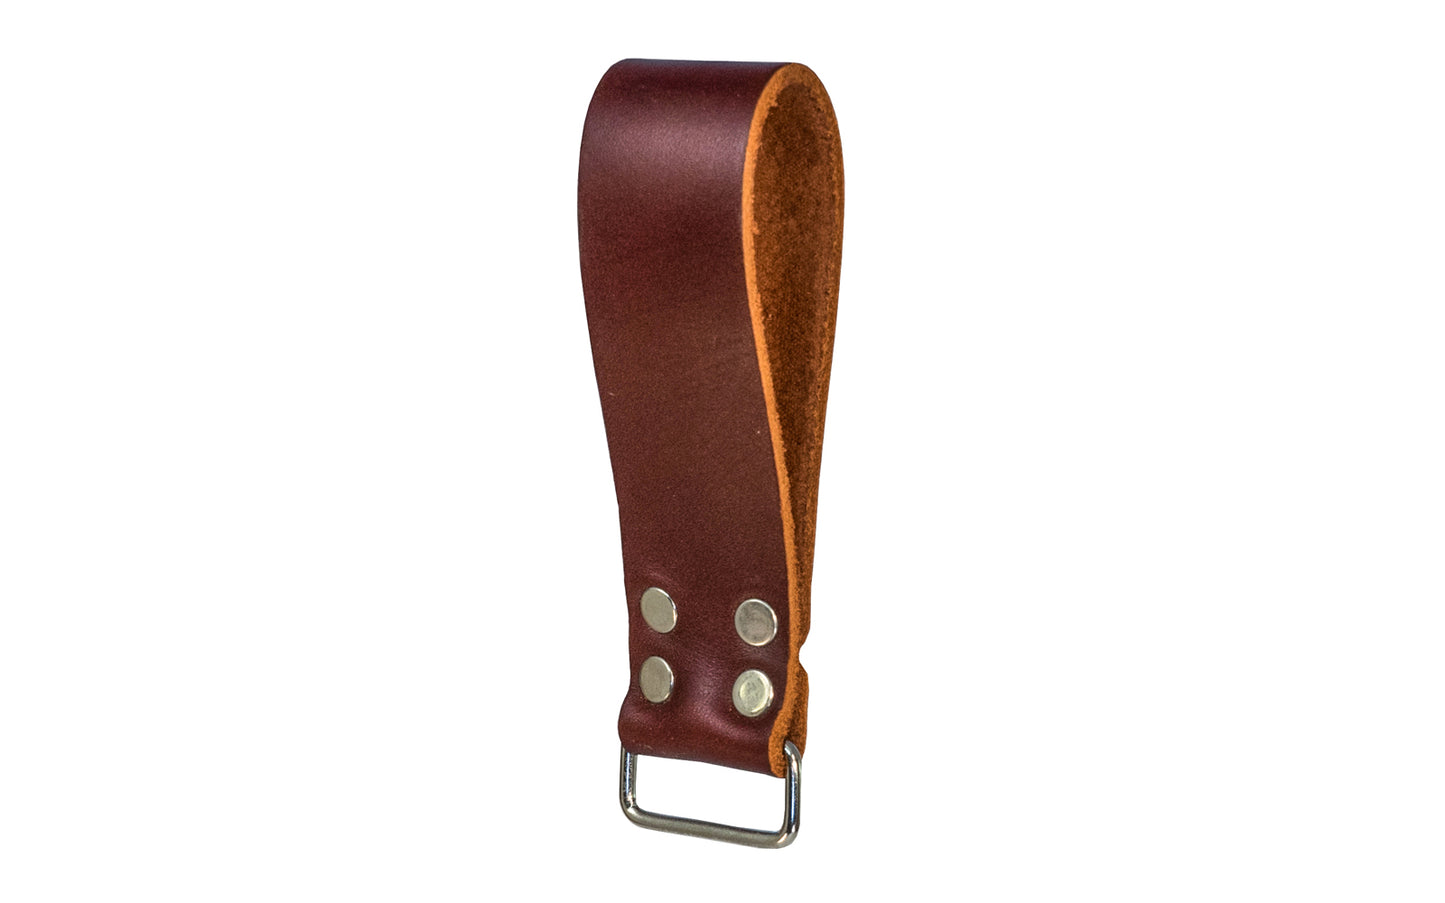 Made in USA - Occidental Leather Rectangular Loop that clip on tape measures, clip-on bags, meter cases, etc. Anything with a clip easily attaches. Fits up to a 3" work belt & clips up to 1" wide. Loop is strongly riveted - Made of genuine leather - Model No. 5026 - 759244143706 - Occidental Leather Belt Attachment